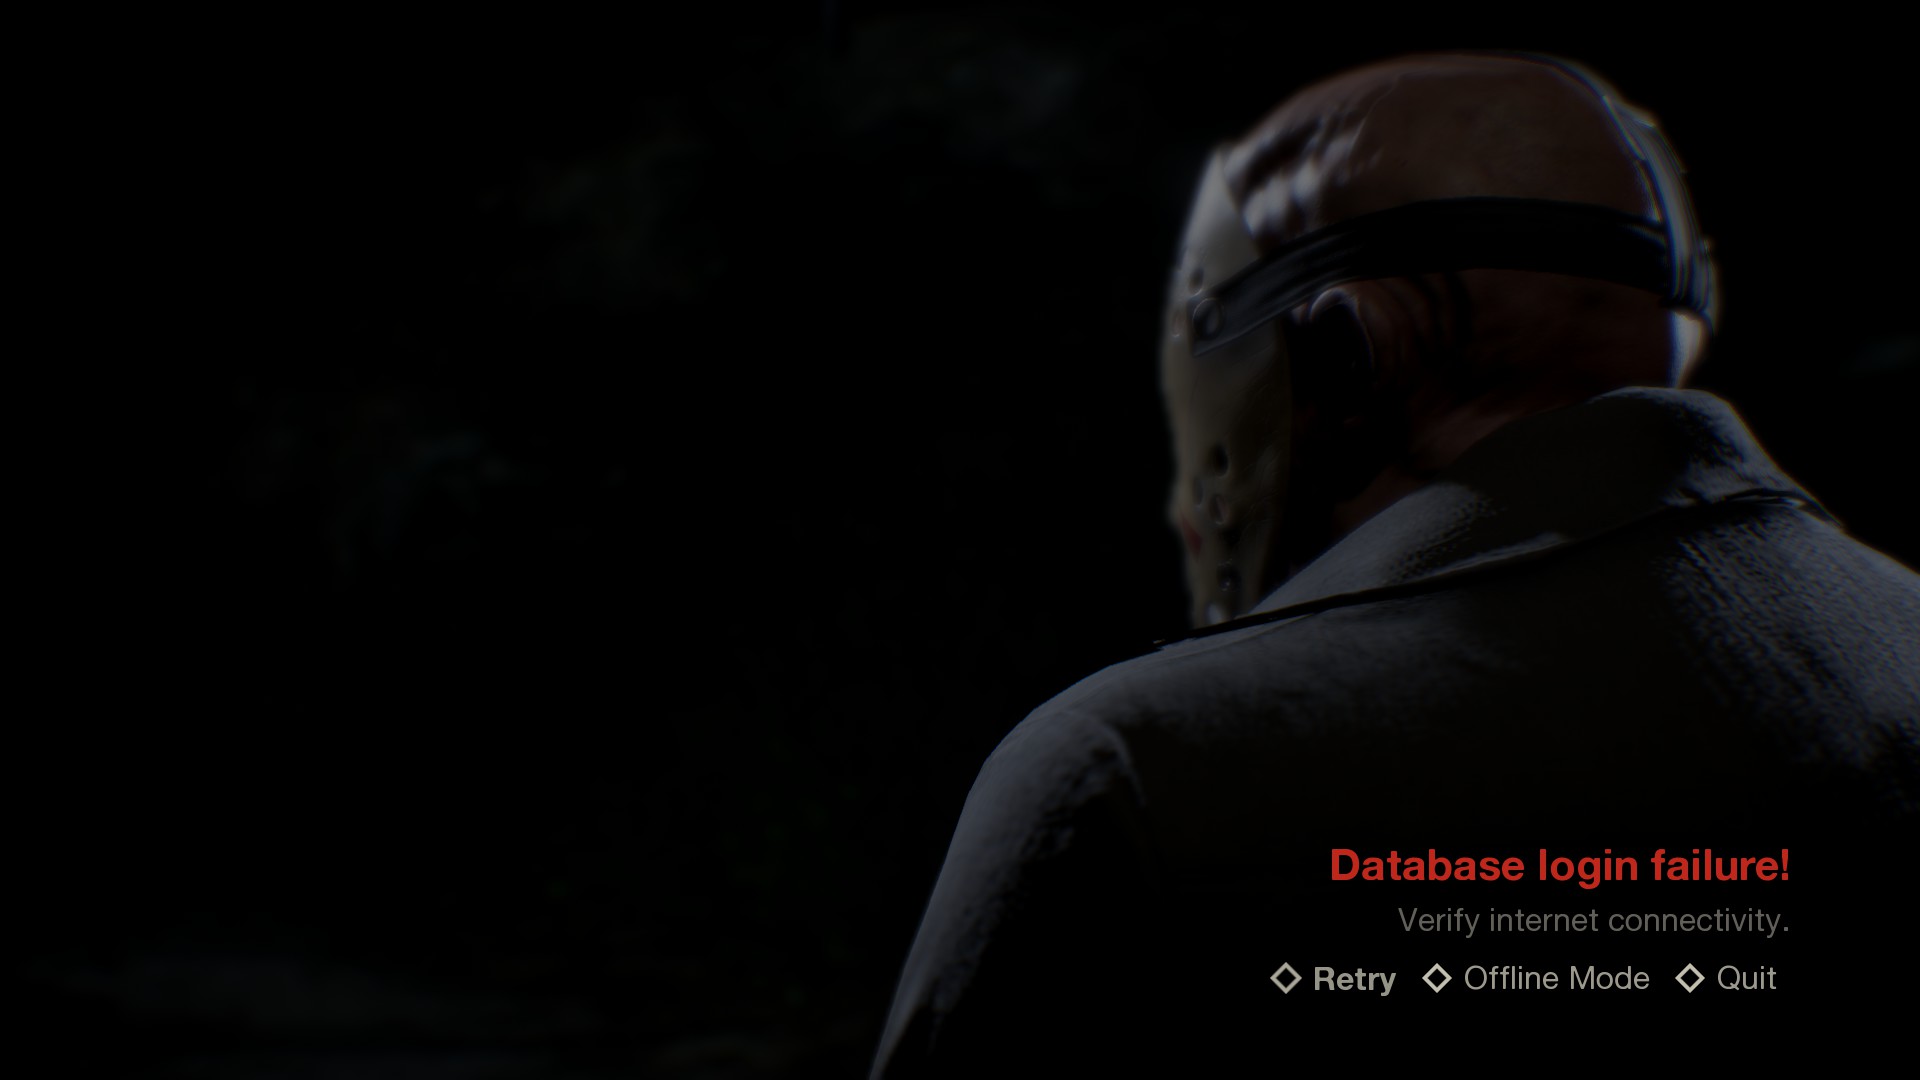 Friday The 13th What Is The Database Login Failure Heavy